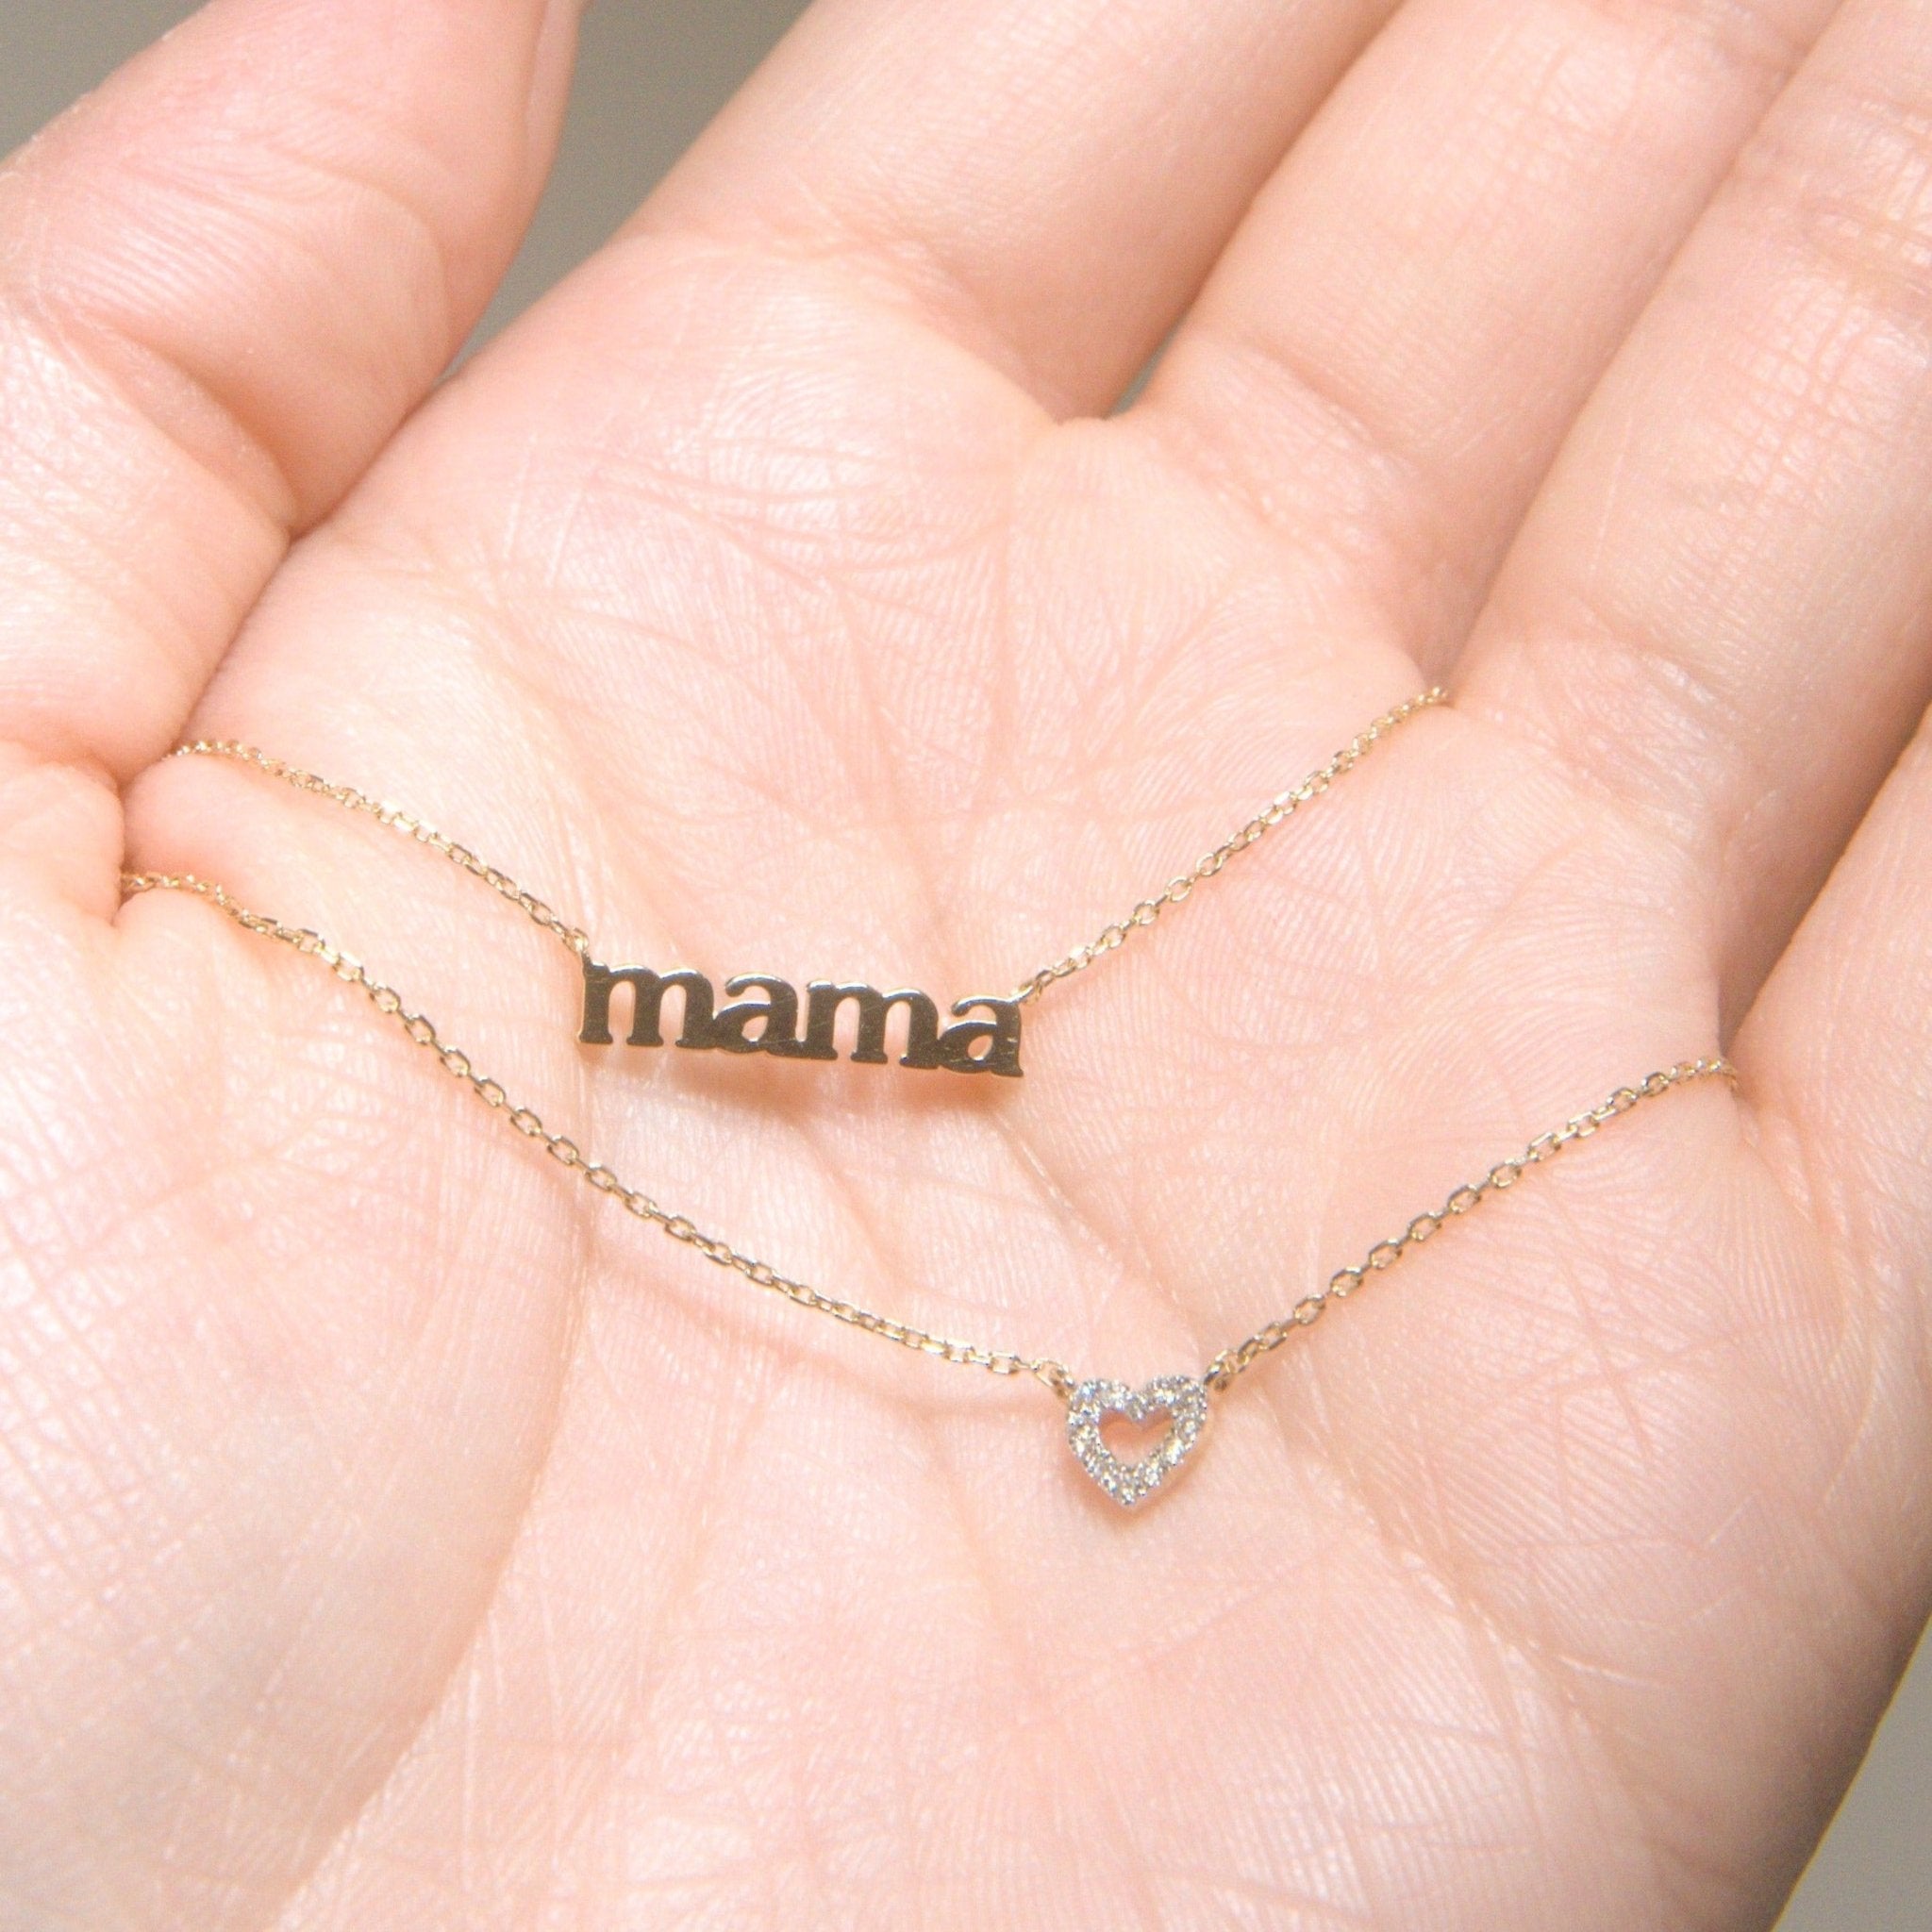 Mama Necklace in Solid 14k Yellow Gold Necklaces Estella Collection #product_description# #tag4# #tag5# #tag6# #tag7# #tag8# #tag9# #tag10#